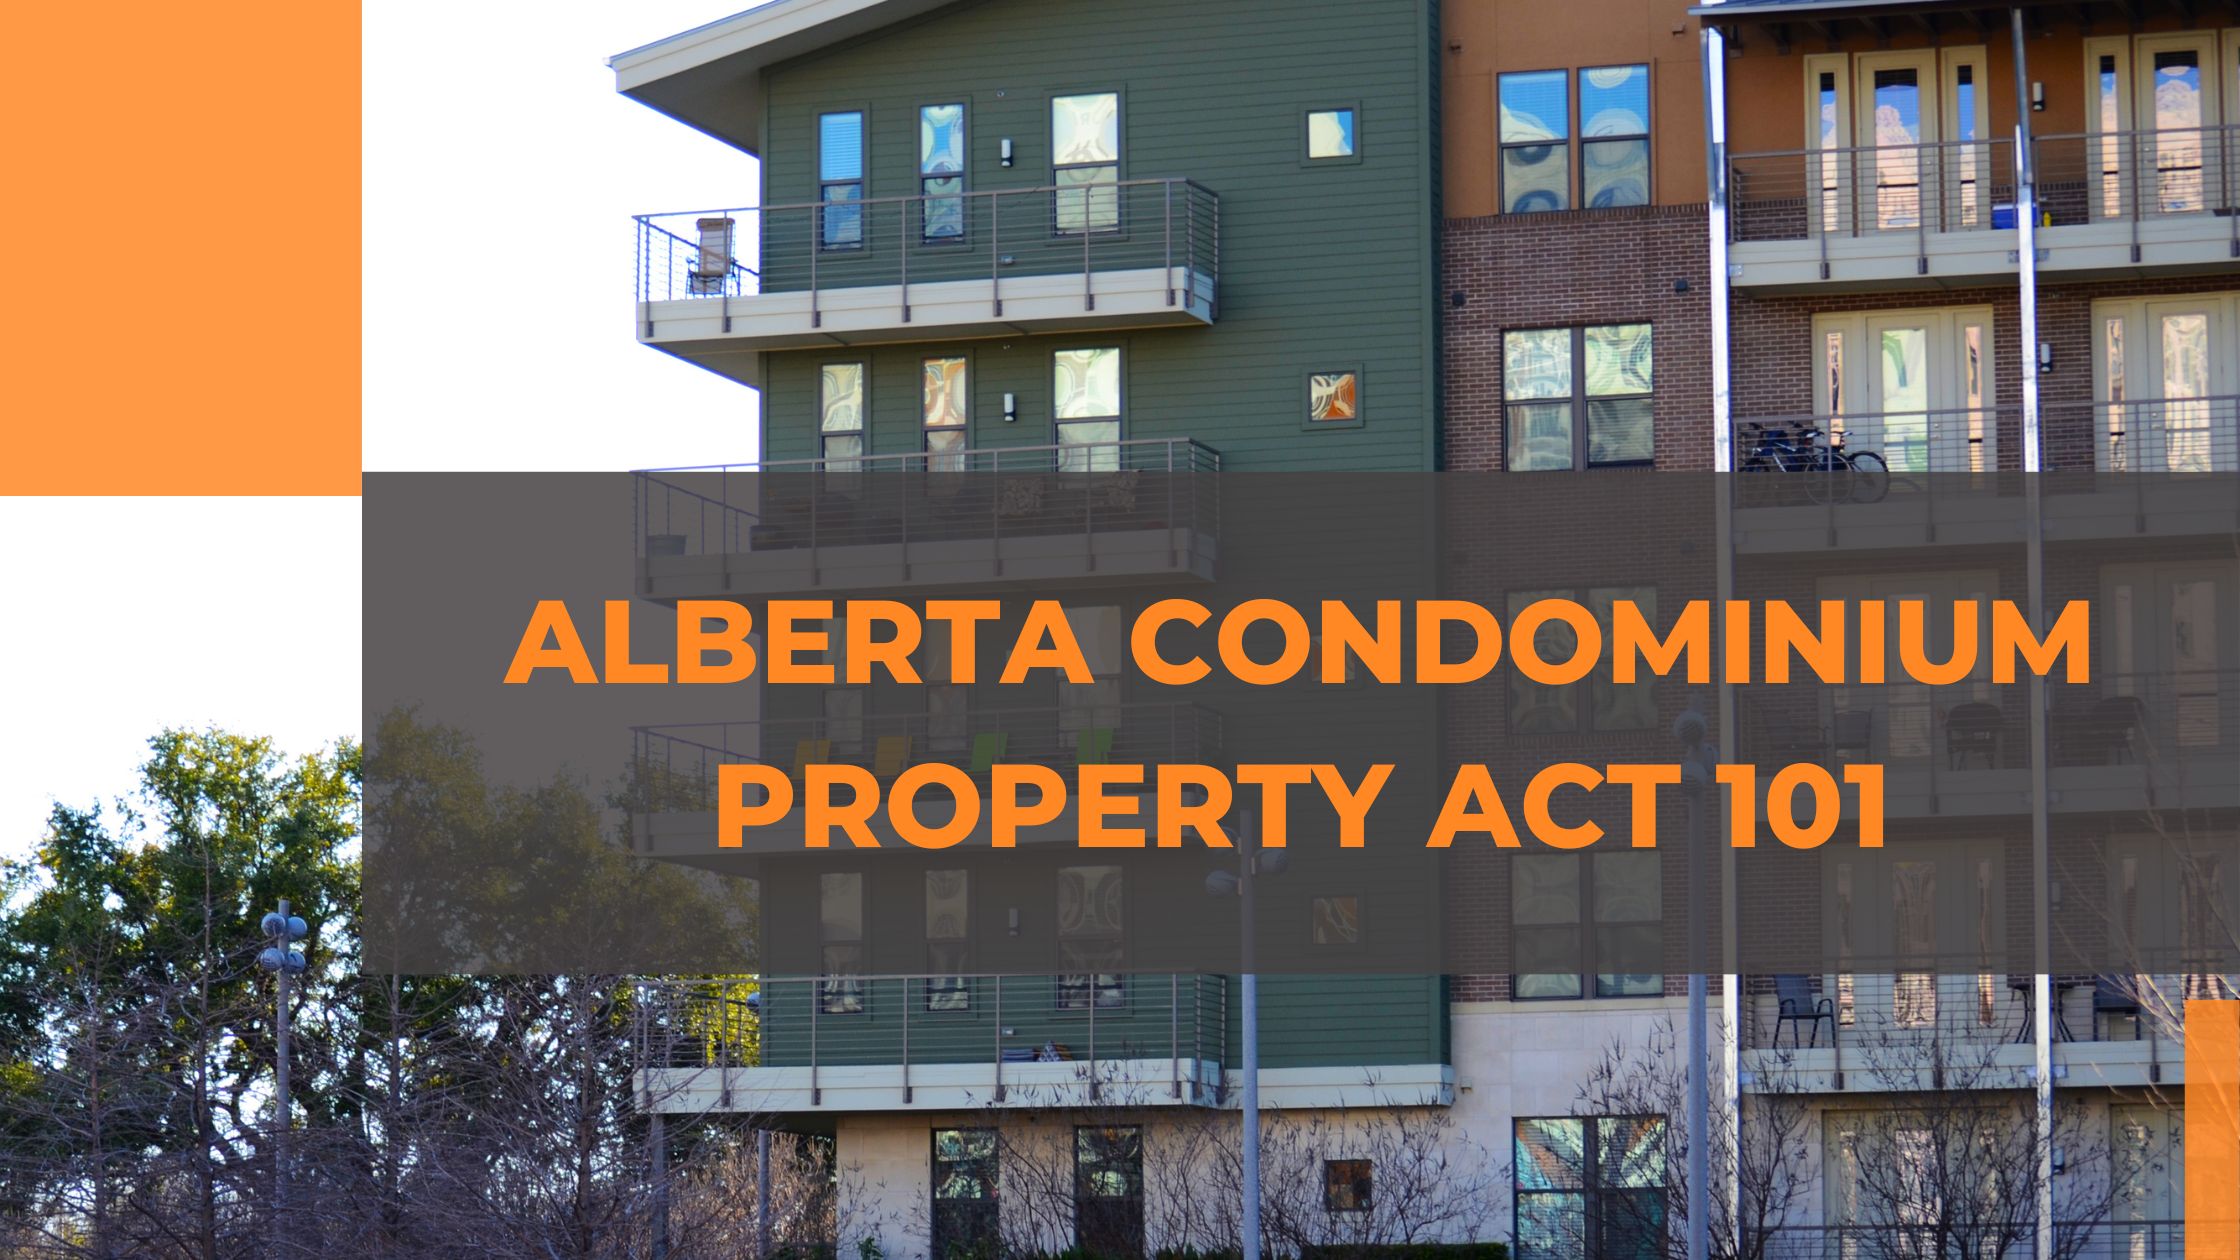 To outline the basics of the Act and cover the high-level points that new condo owners should know.